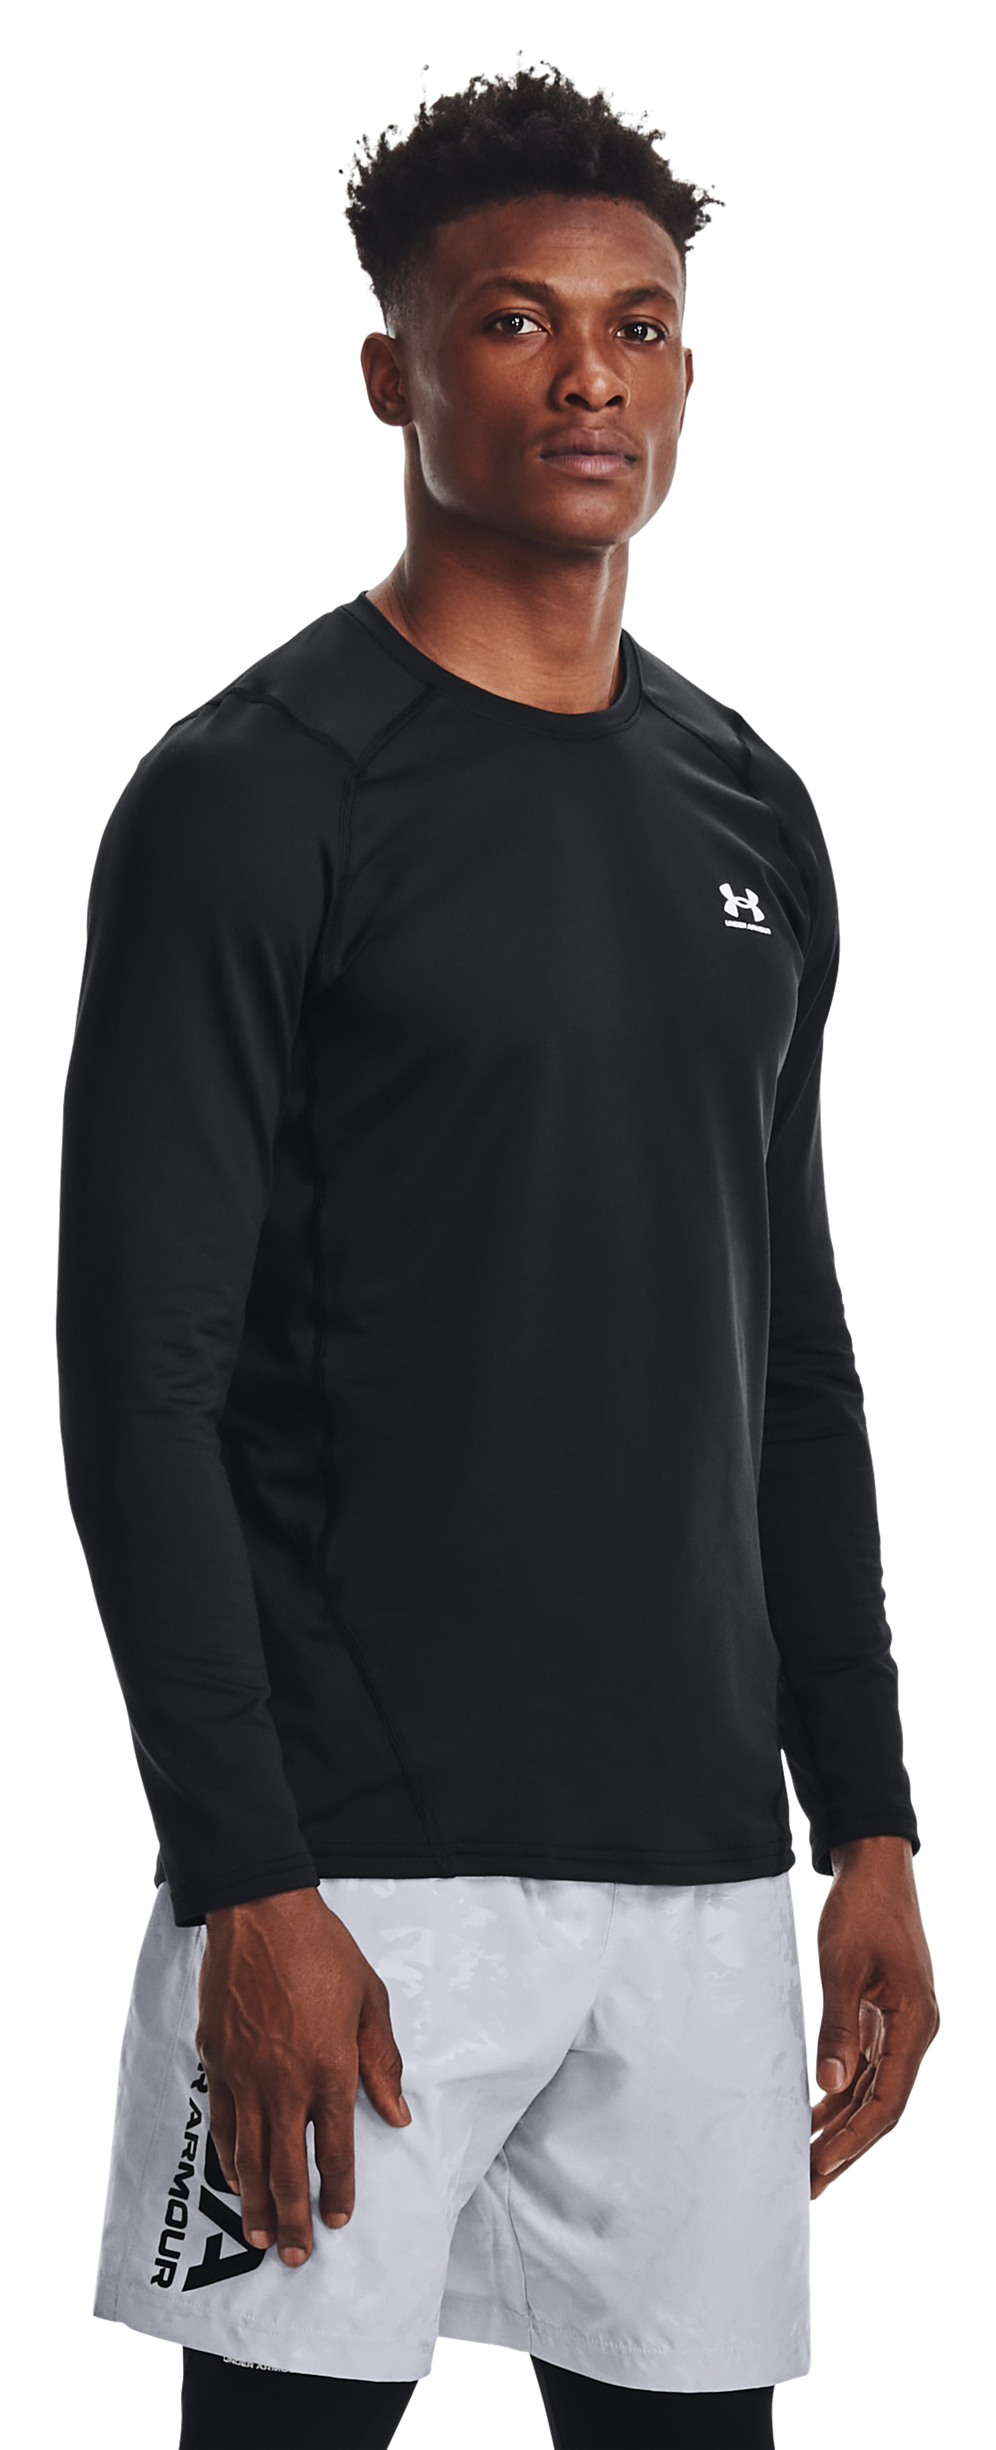 Under Armour ColdGear Fitted Long-Sleeve Crew for Men - Black/White - 4XLT